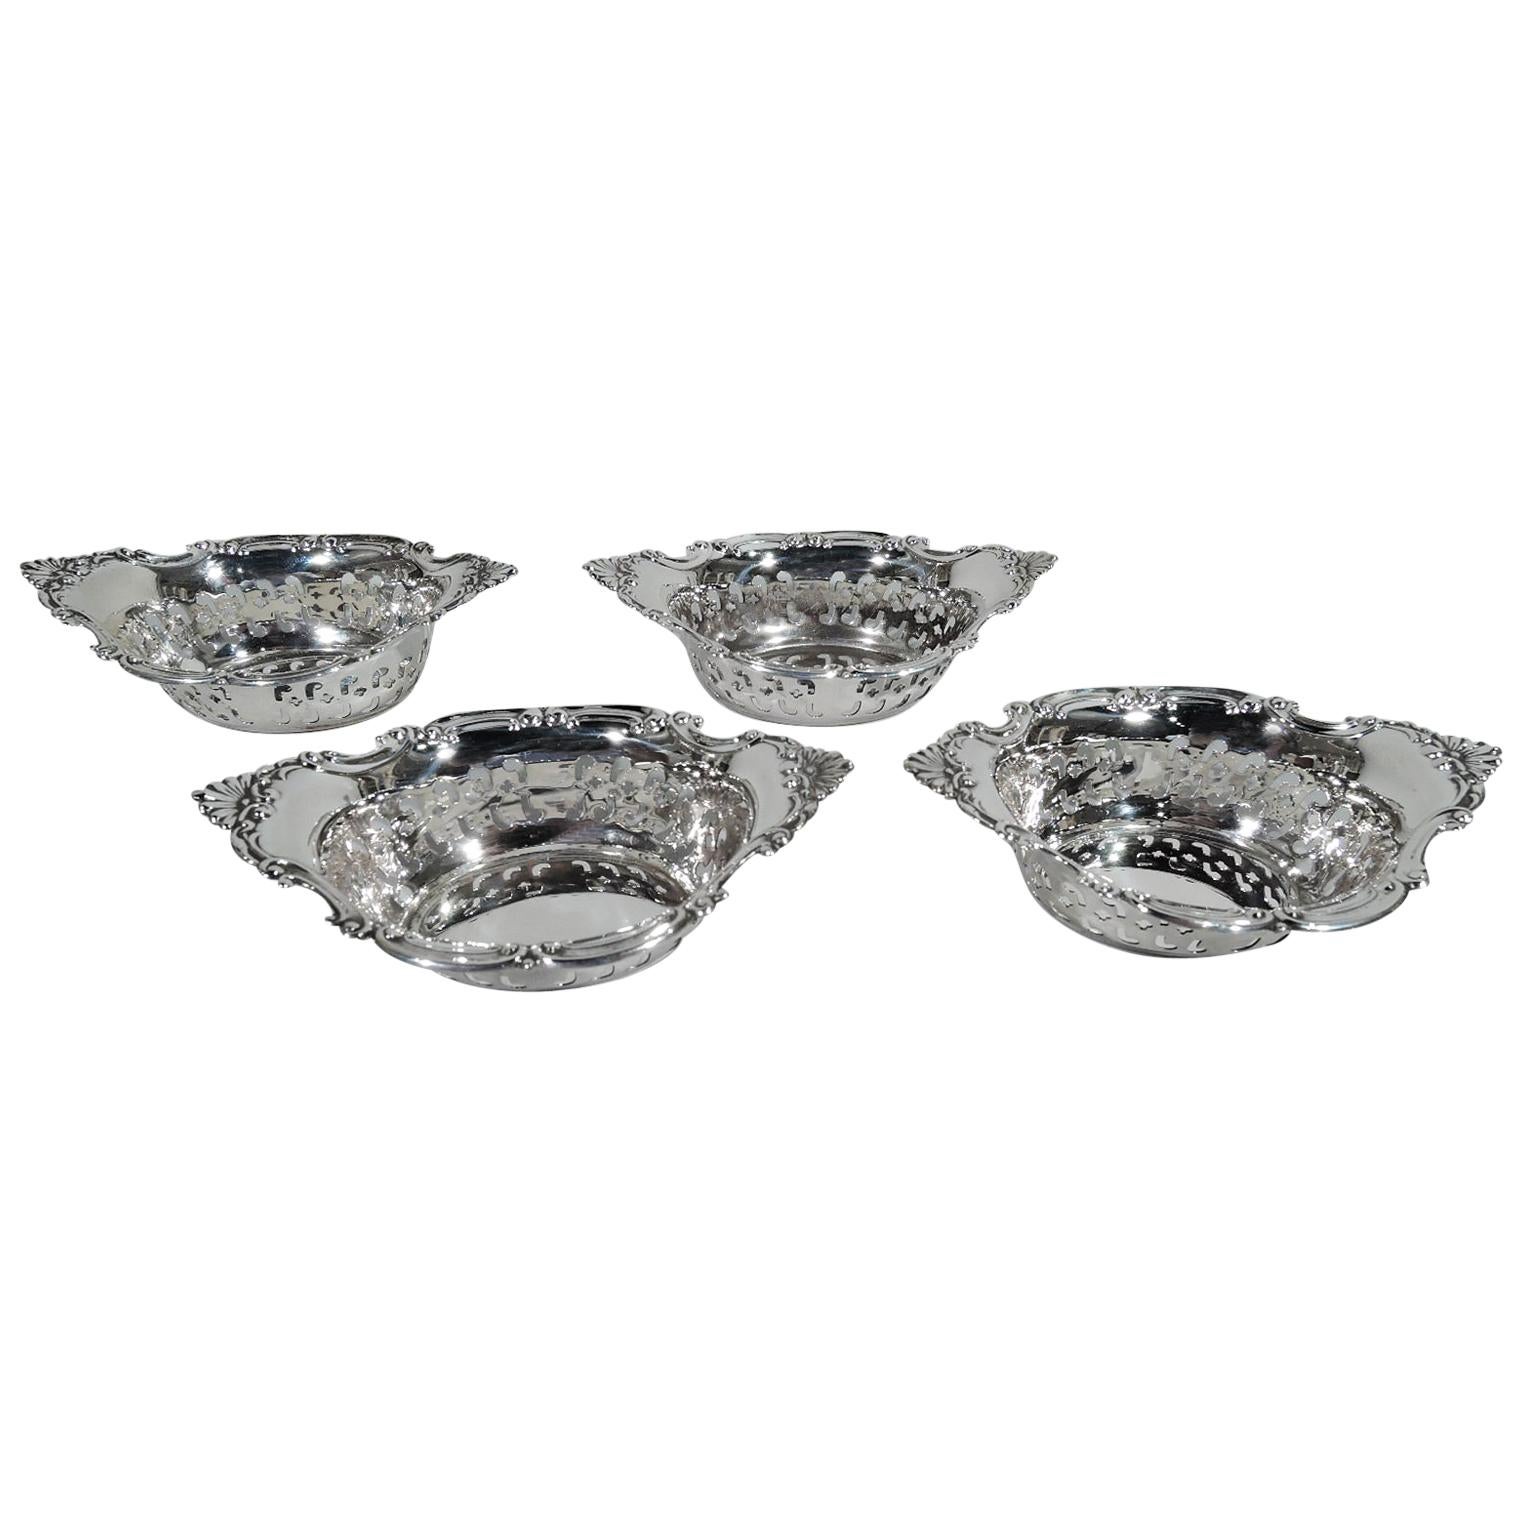 Set of 4 Gorham Classical Sterling Silver Nut Dishes